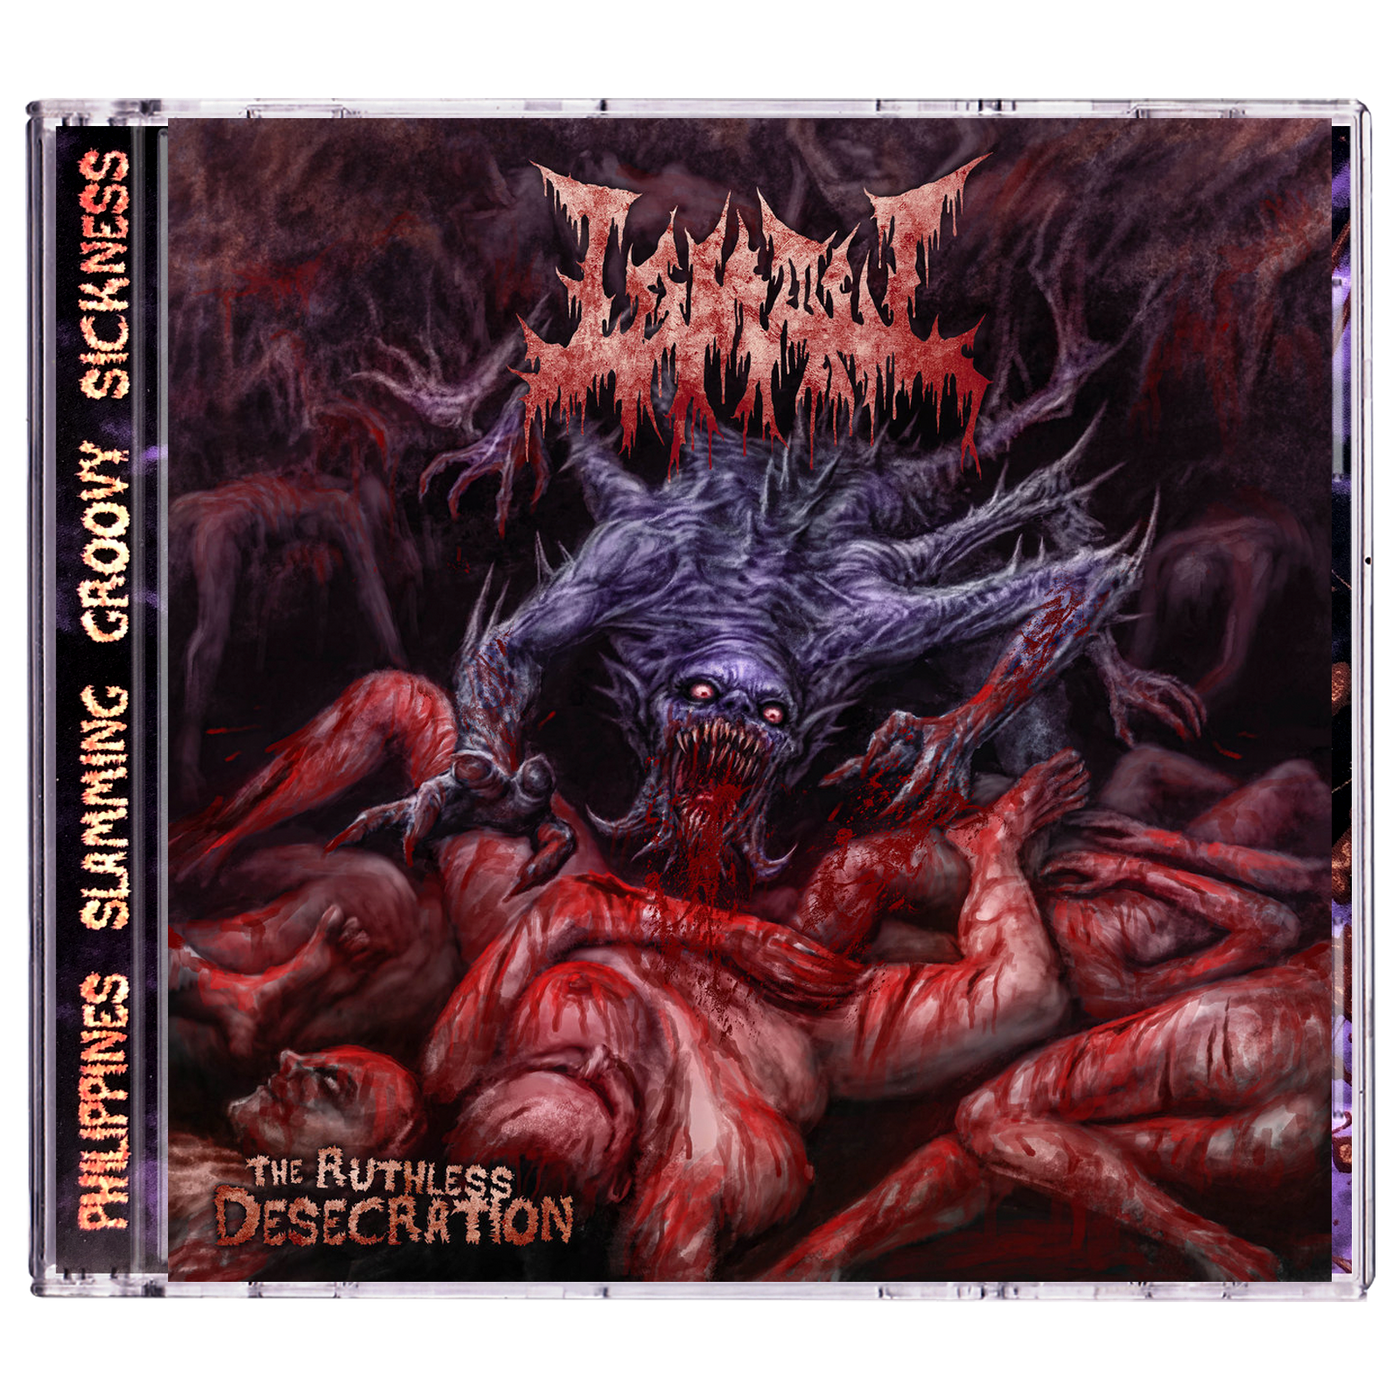 Lamaw 'The Ruthless Of Desecration' CD